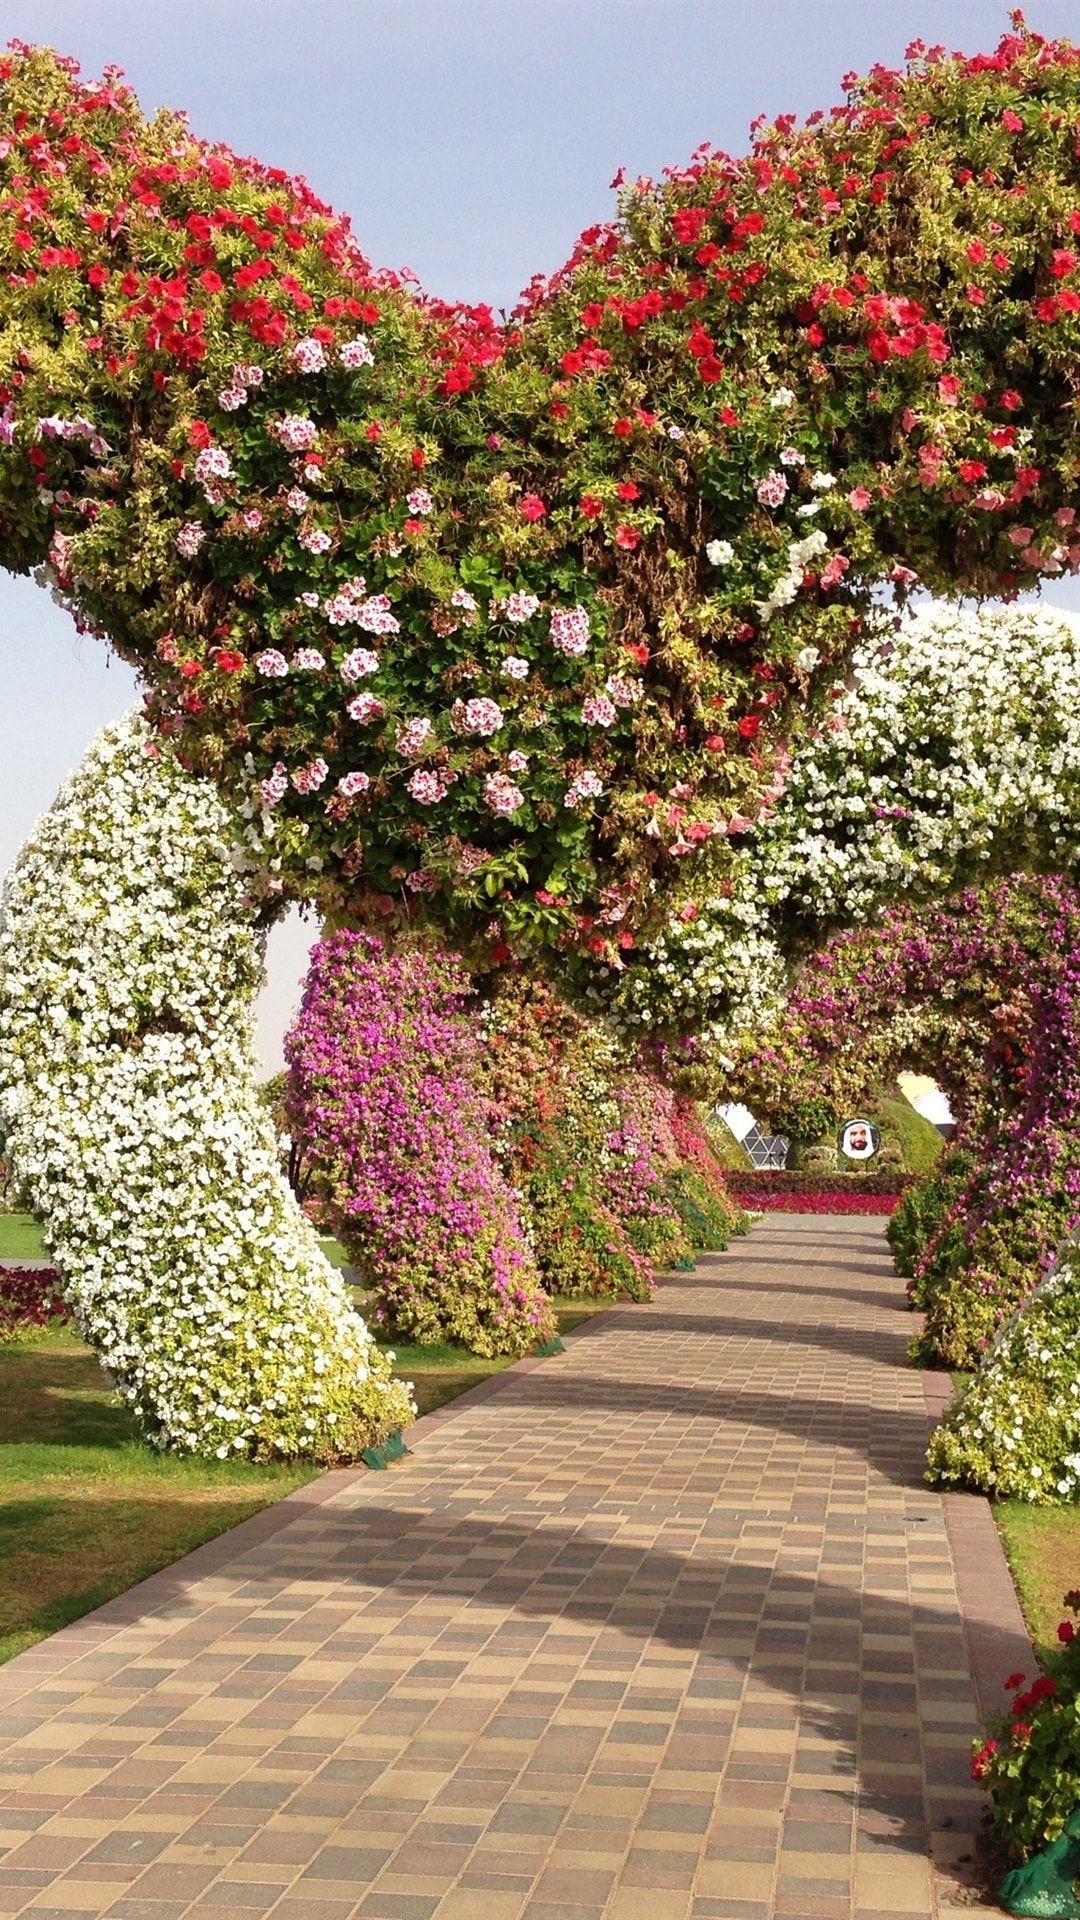 A pathway with flowers and trees - Garden